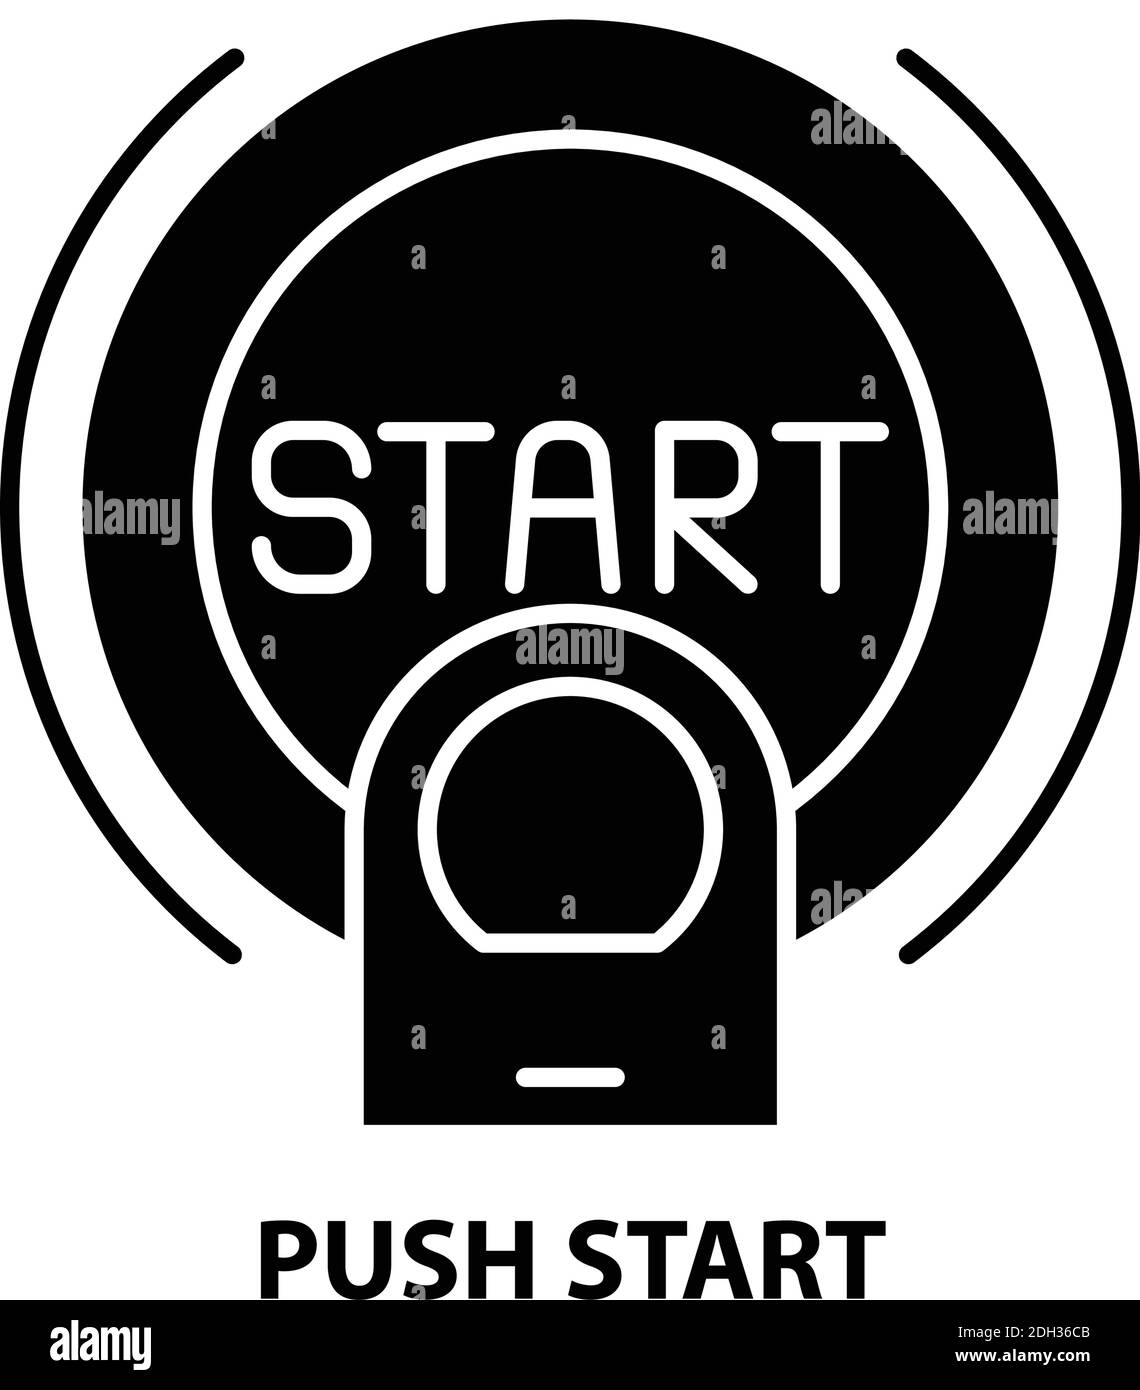 push start icon, black vector sign with editable strokes, concept illustration Stock Vector